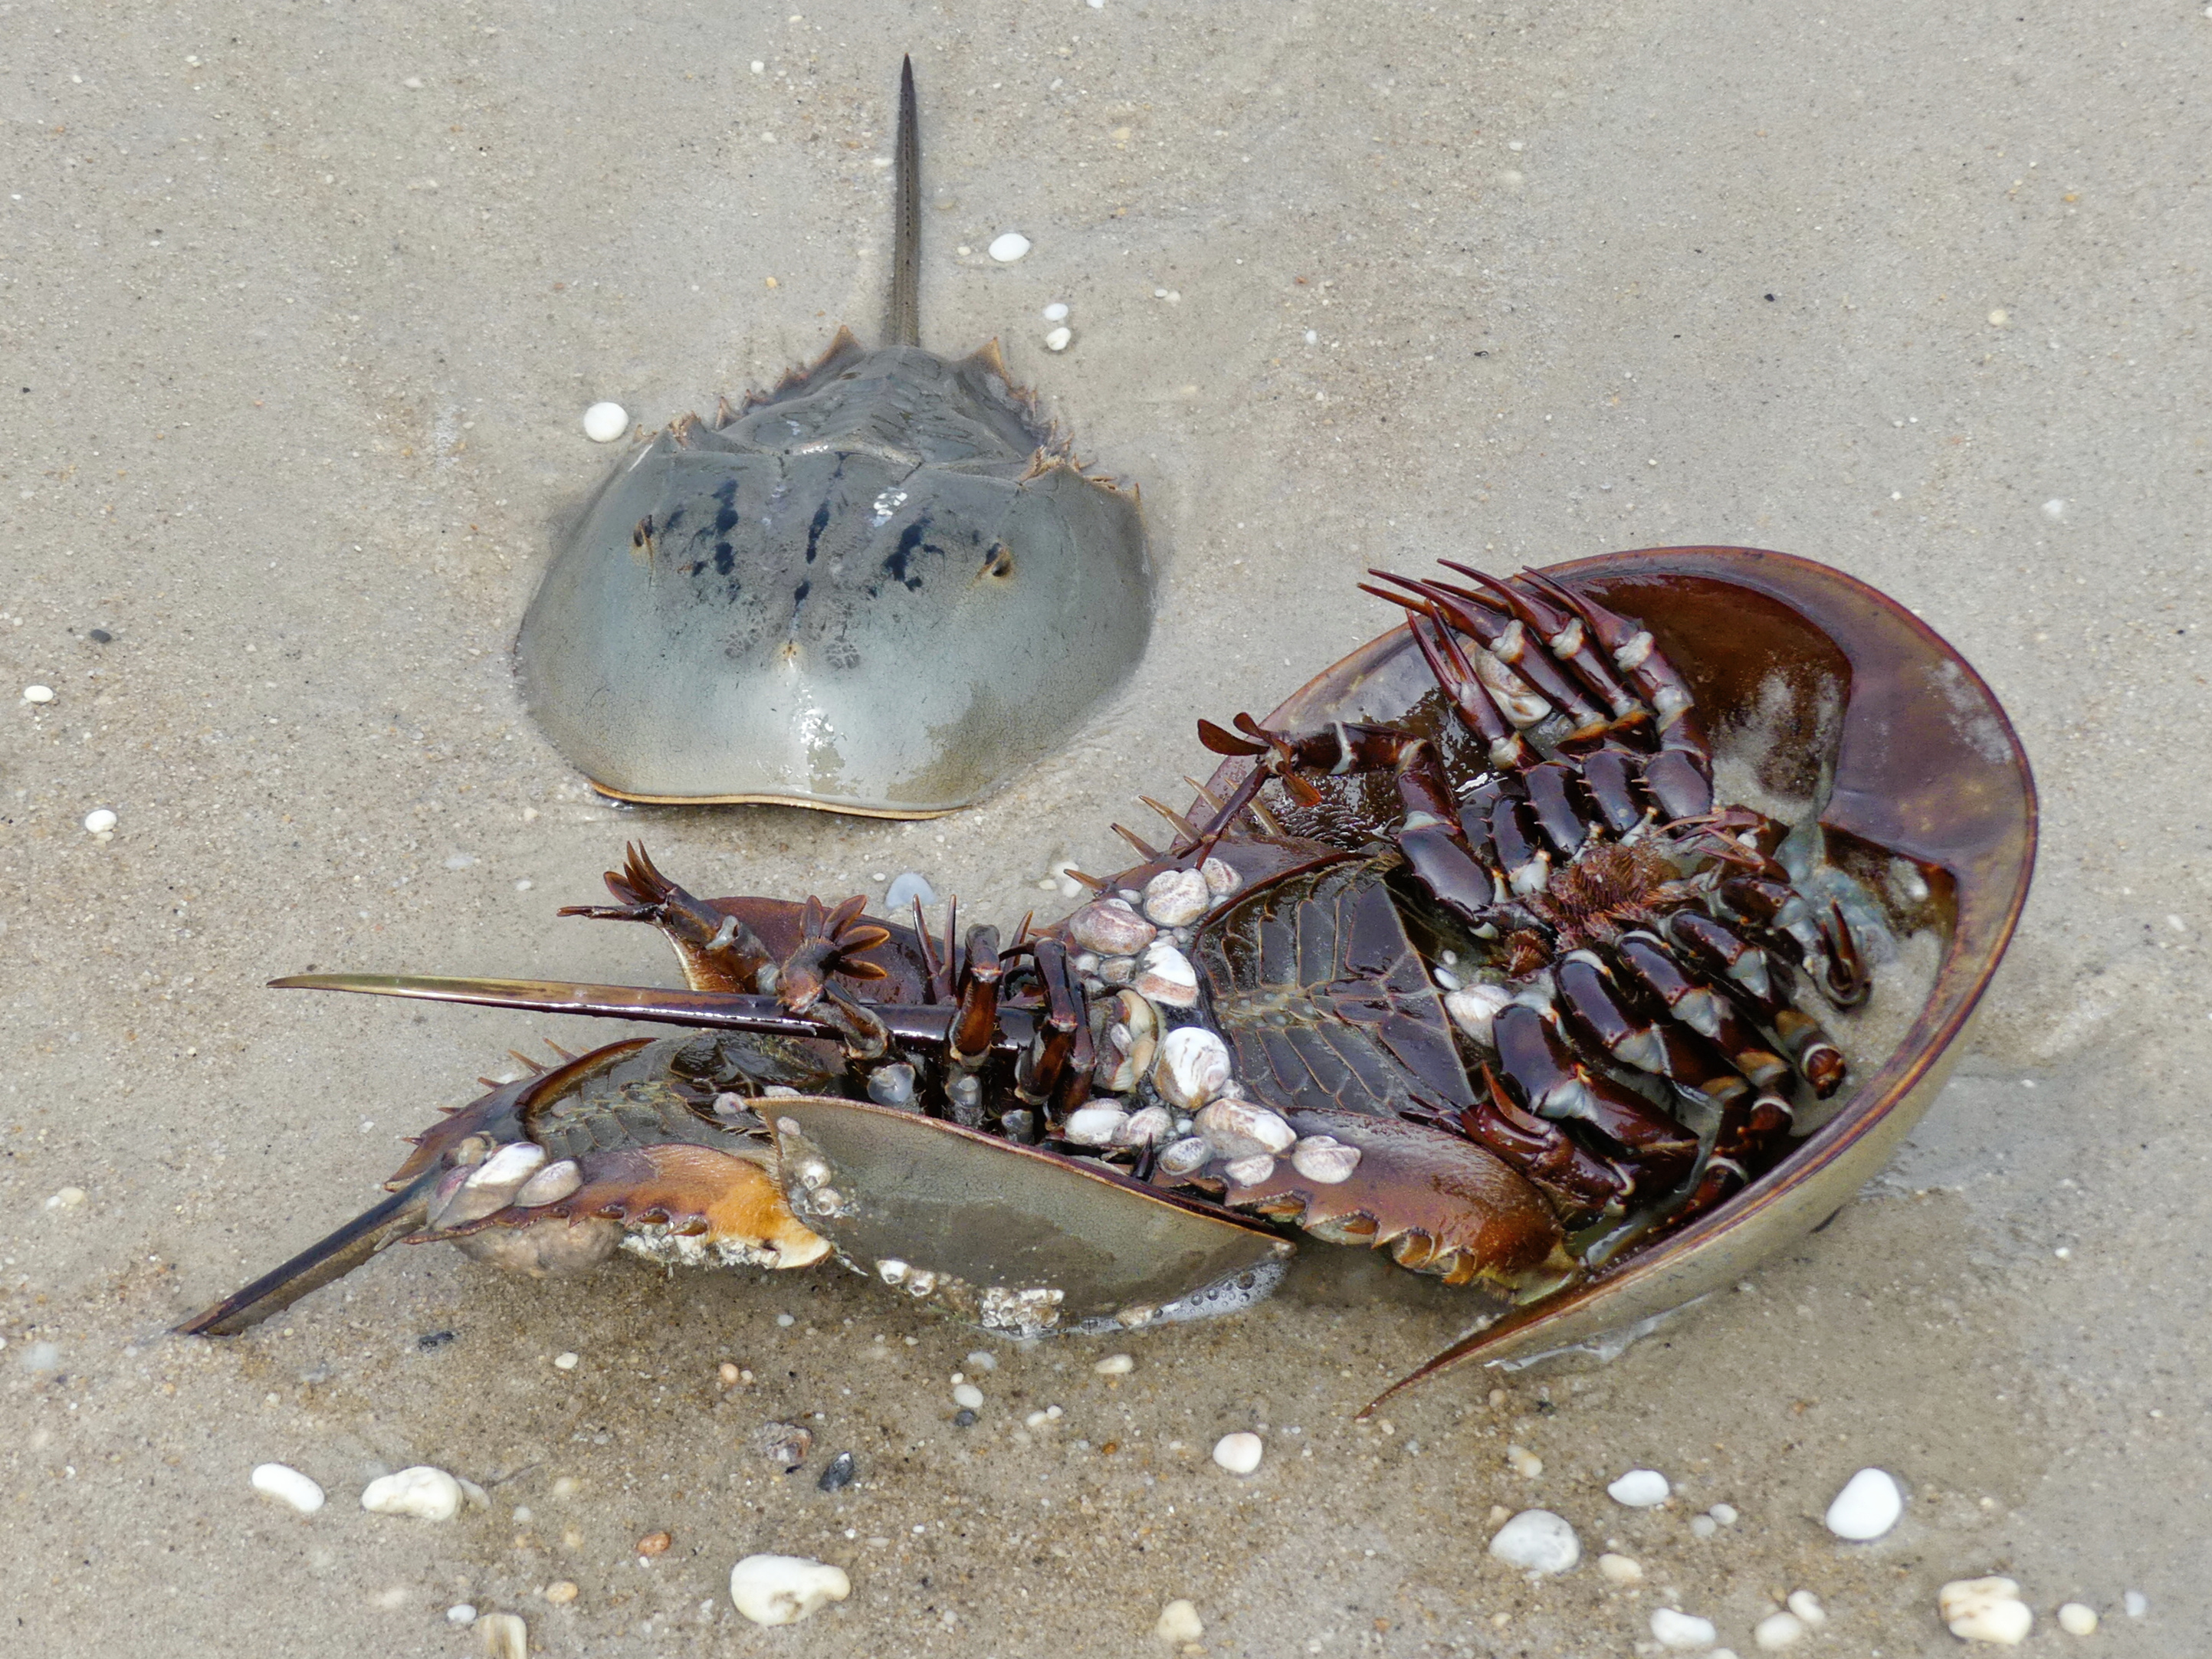 Overturned mating pair of Horseshoe Crabs on a beach with another male approaching.